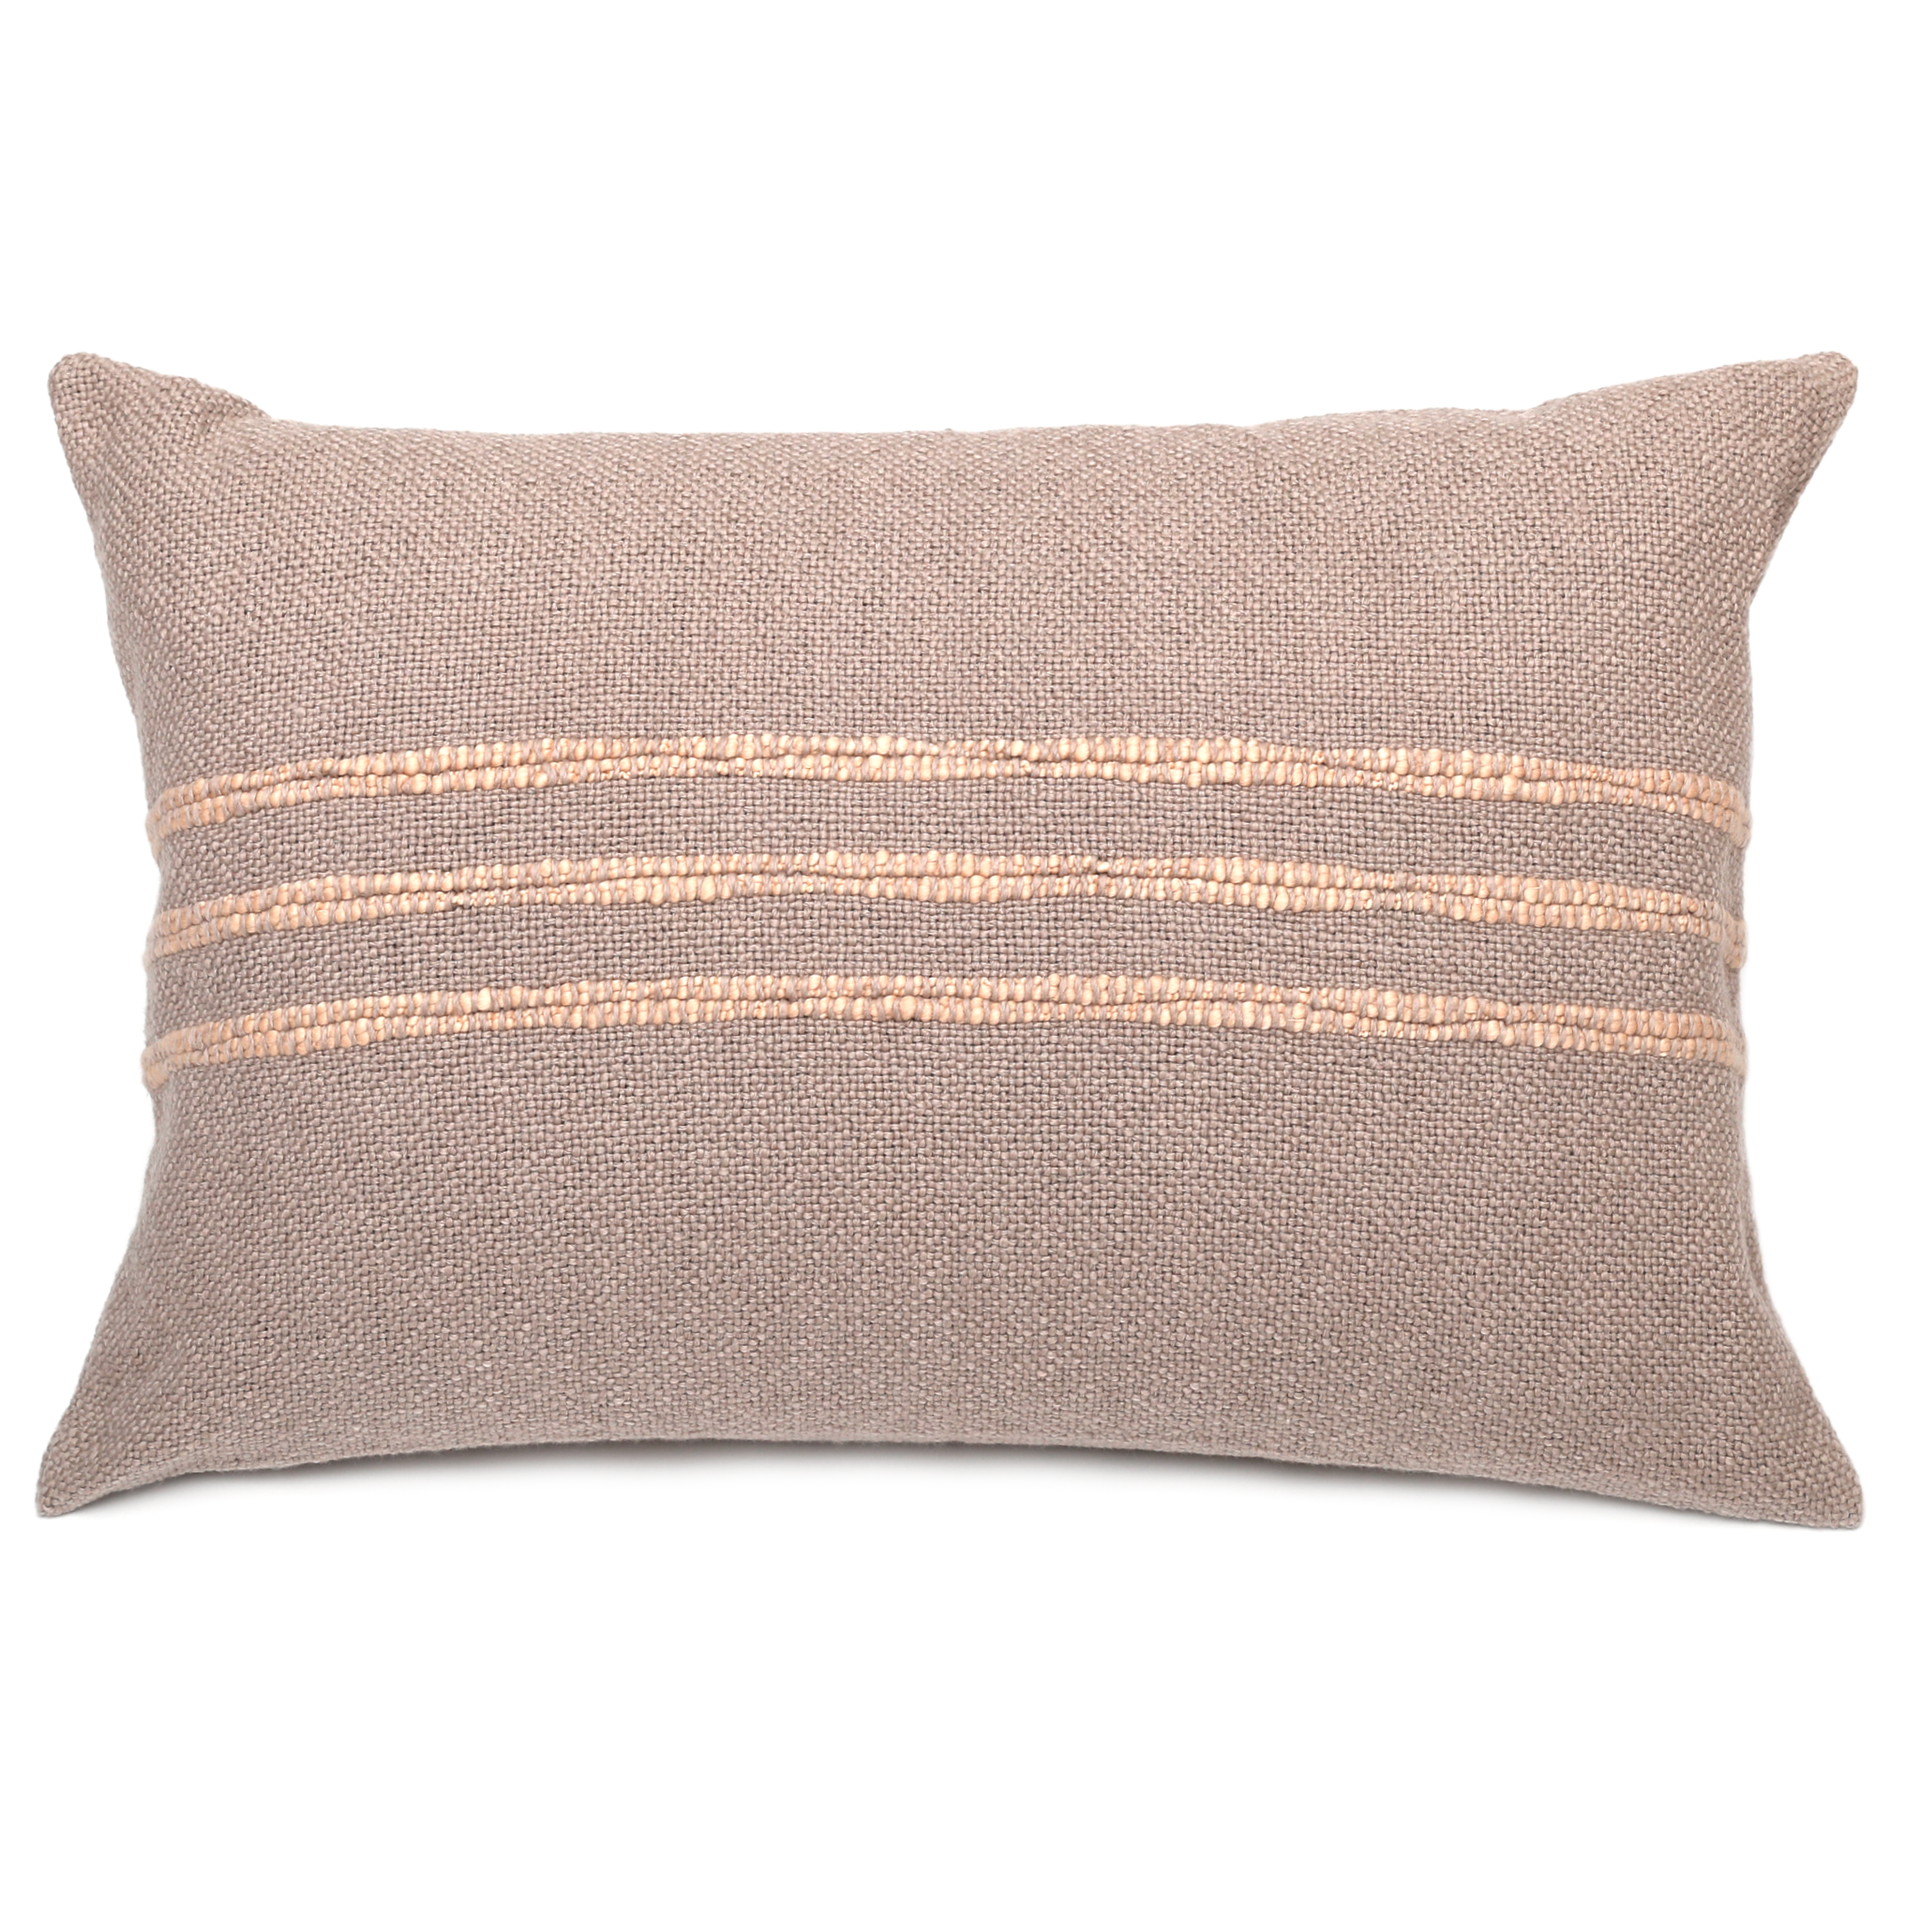 https://www.intiearth.com/cdn/shop/products/Intiearth-caral-lumbar-taupe-light-terracotta-stripe-pillow_97aab87d-54ad-4573-90e2-88994c6f9587.png?v=1682001383&width=1920